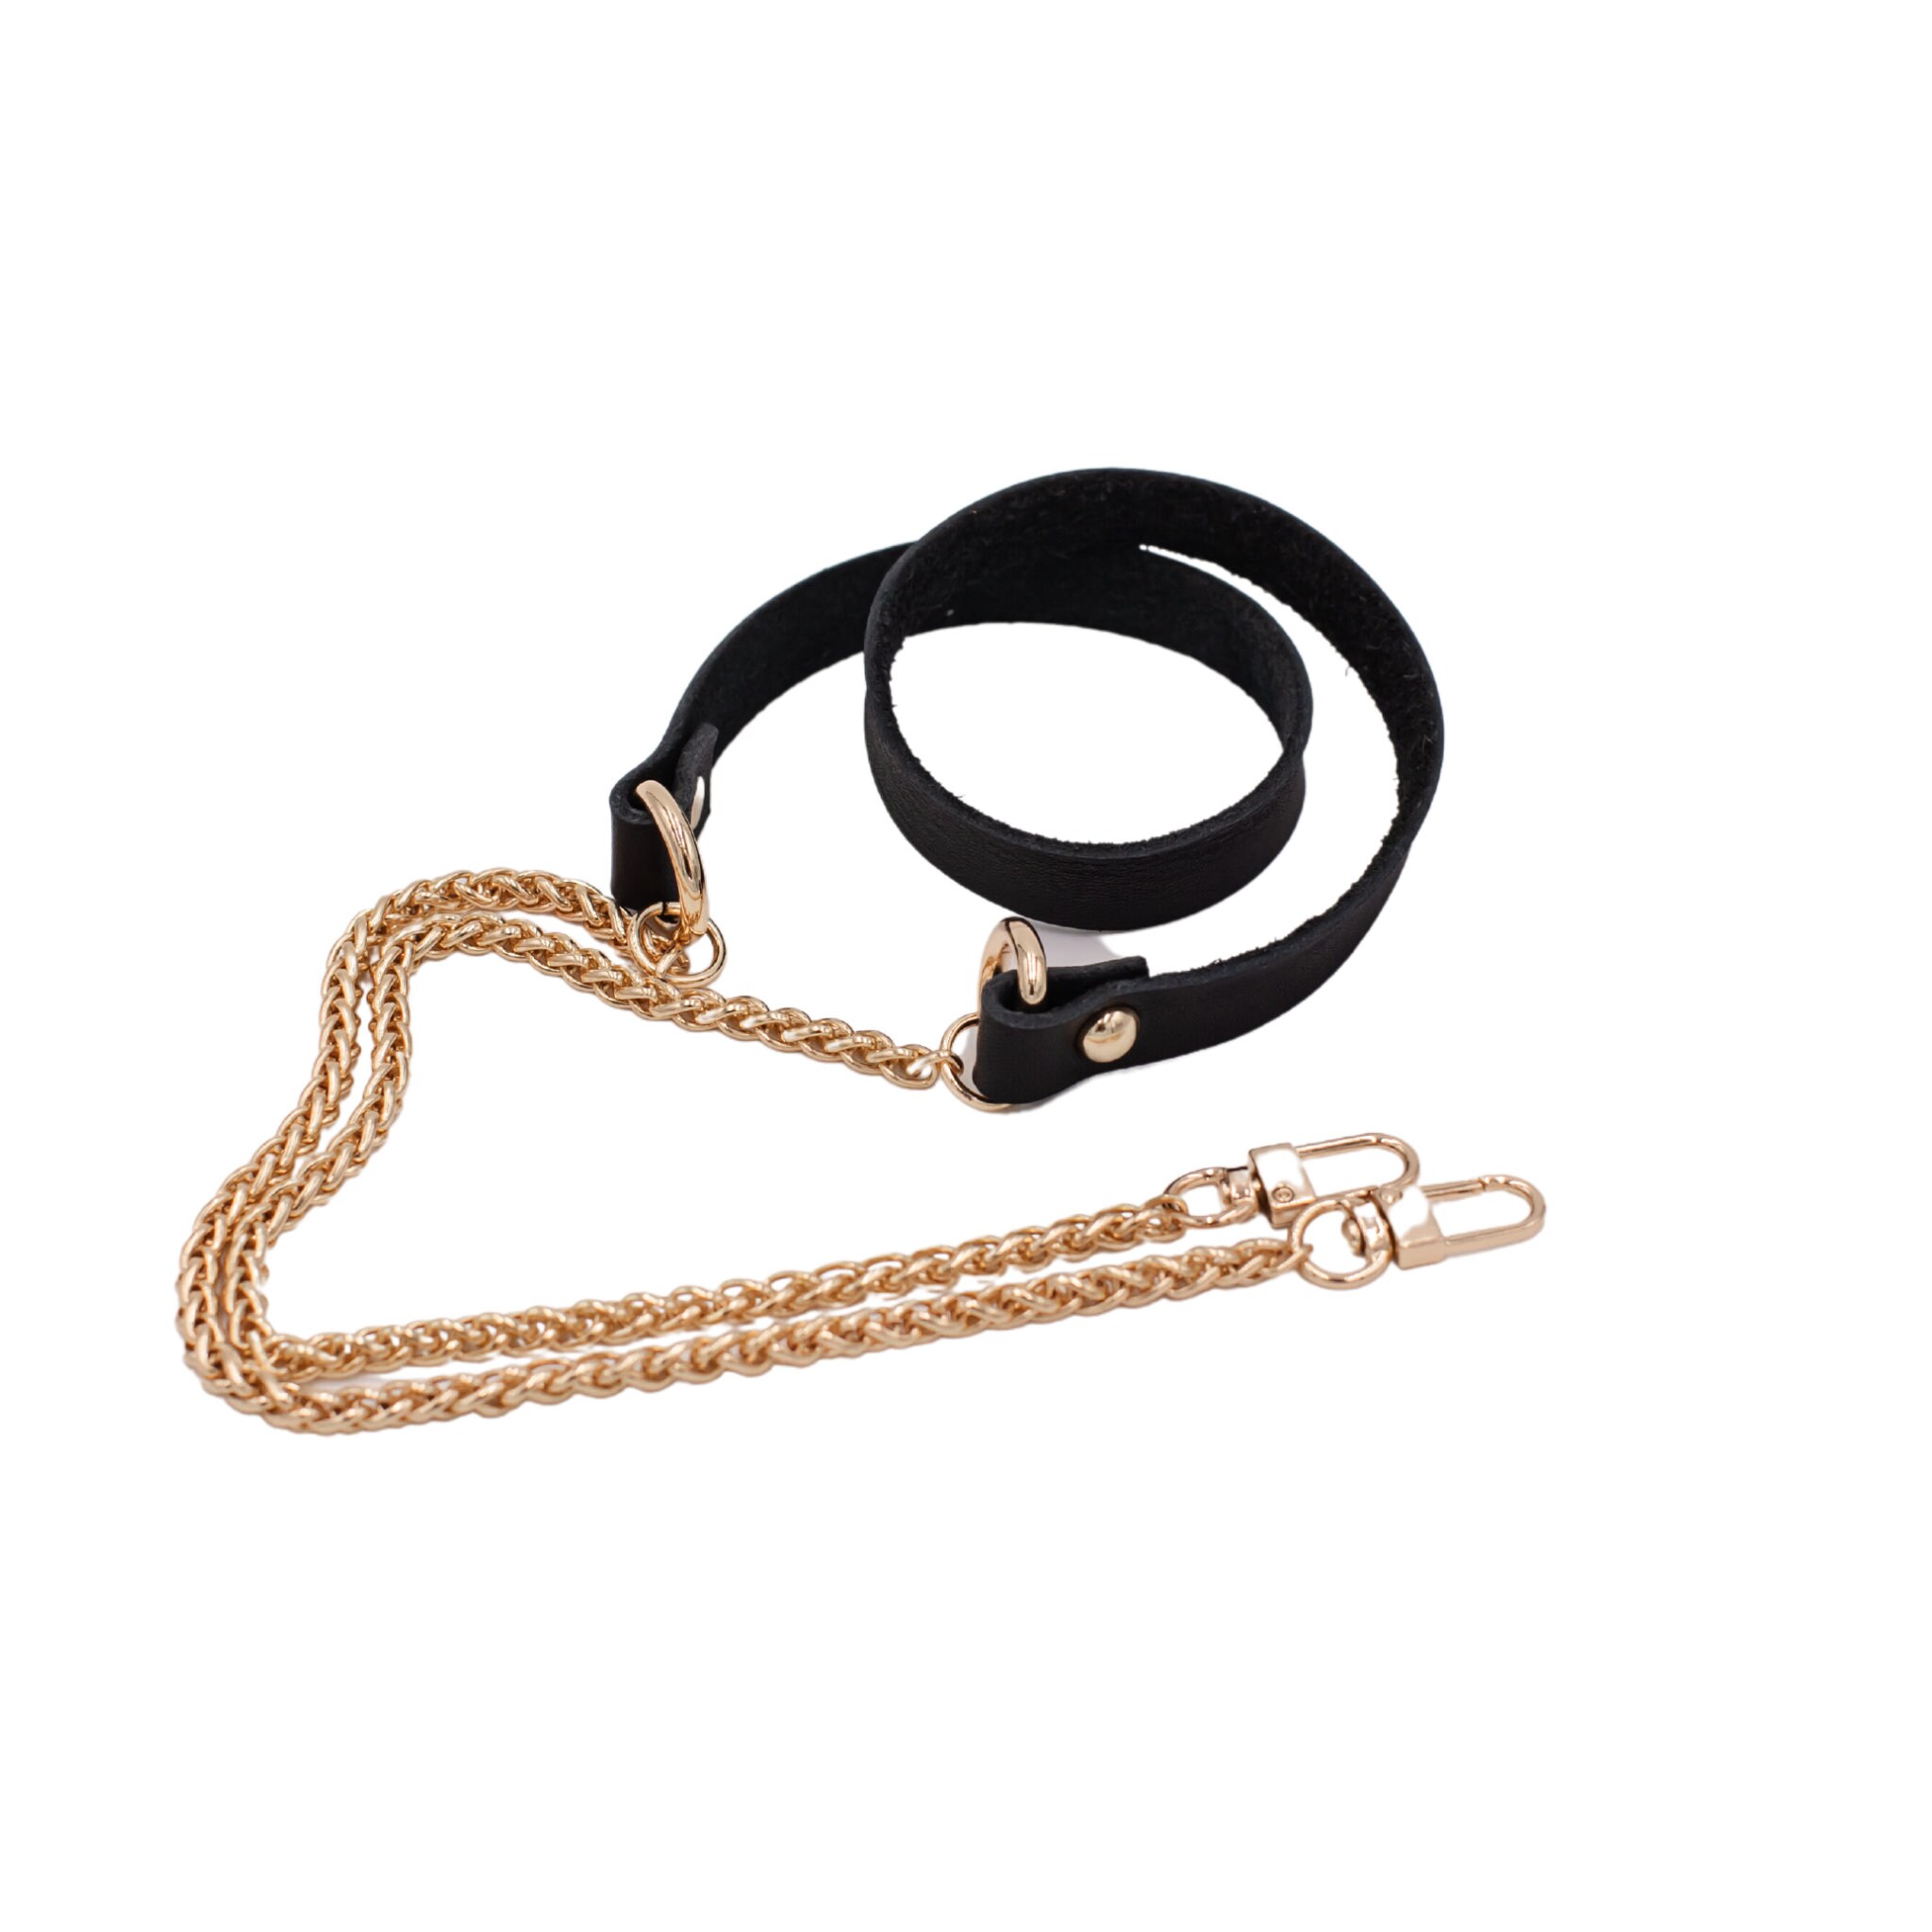 Wealrit 1 pcs 55.1 Inch Black Leather and Gold Chain Purse Strap,Black  Leather Bag Strap,Leather Pur…See more Wealrit 1 pcs 55.1 Inch Black  Leather